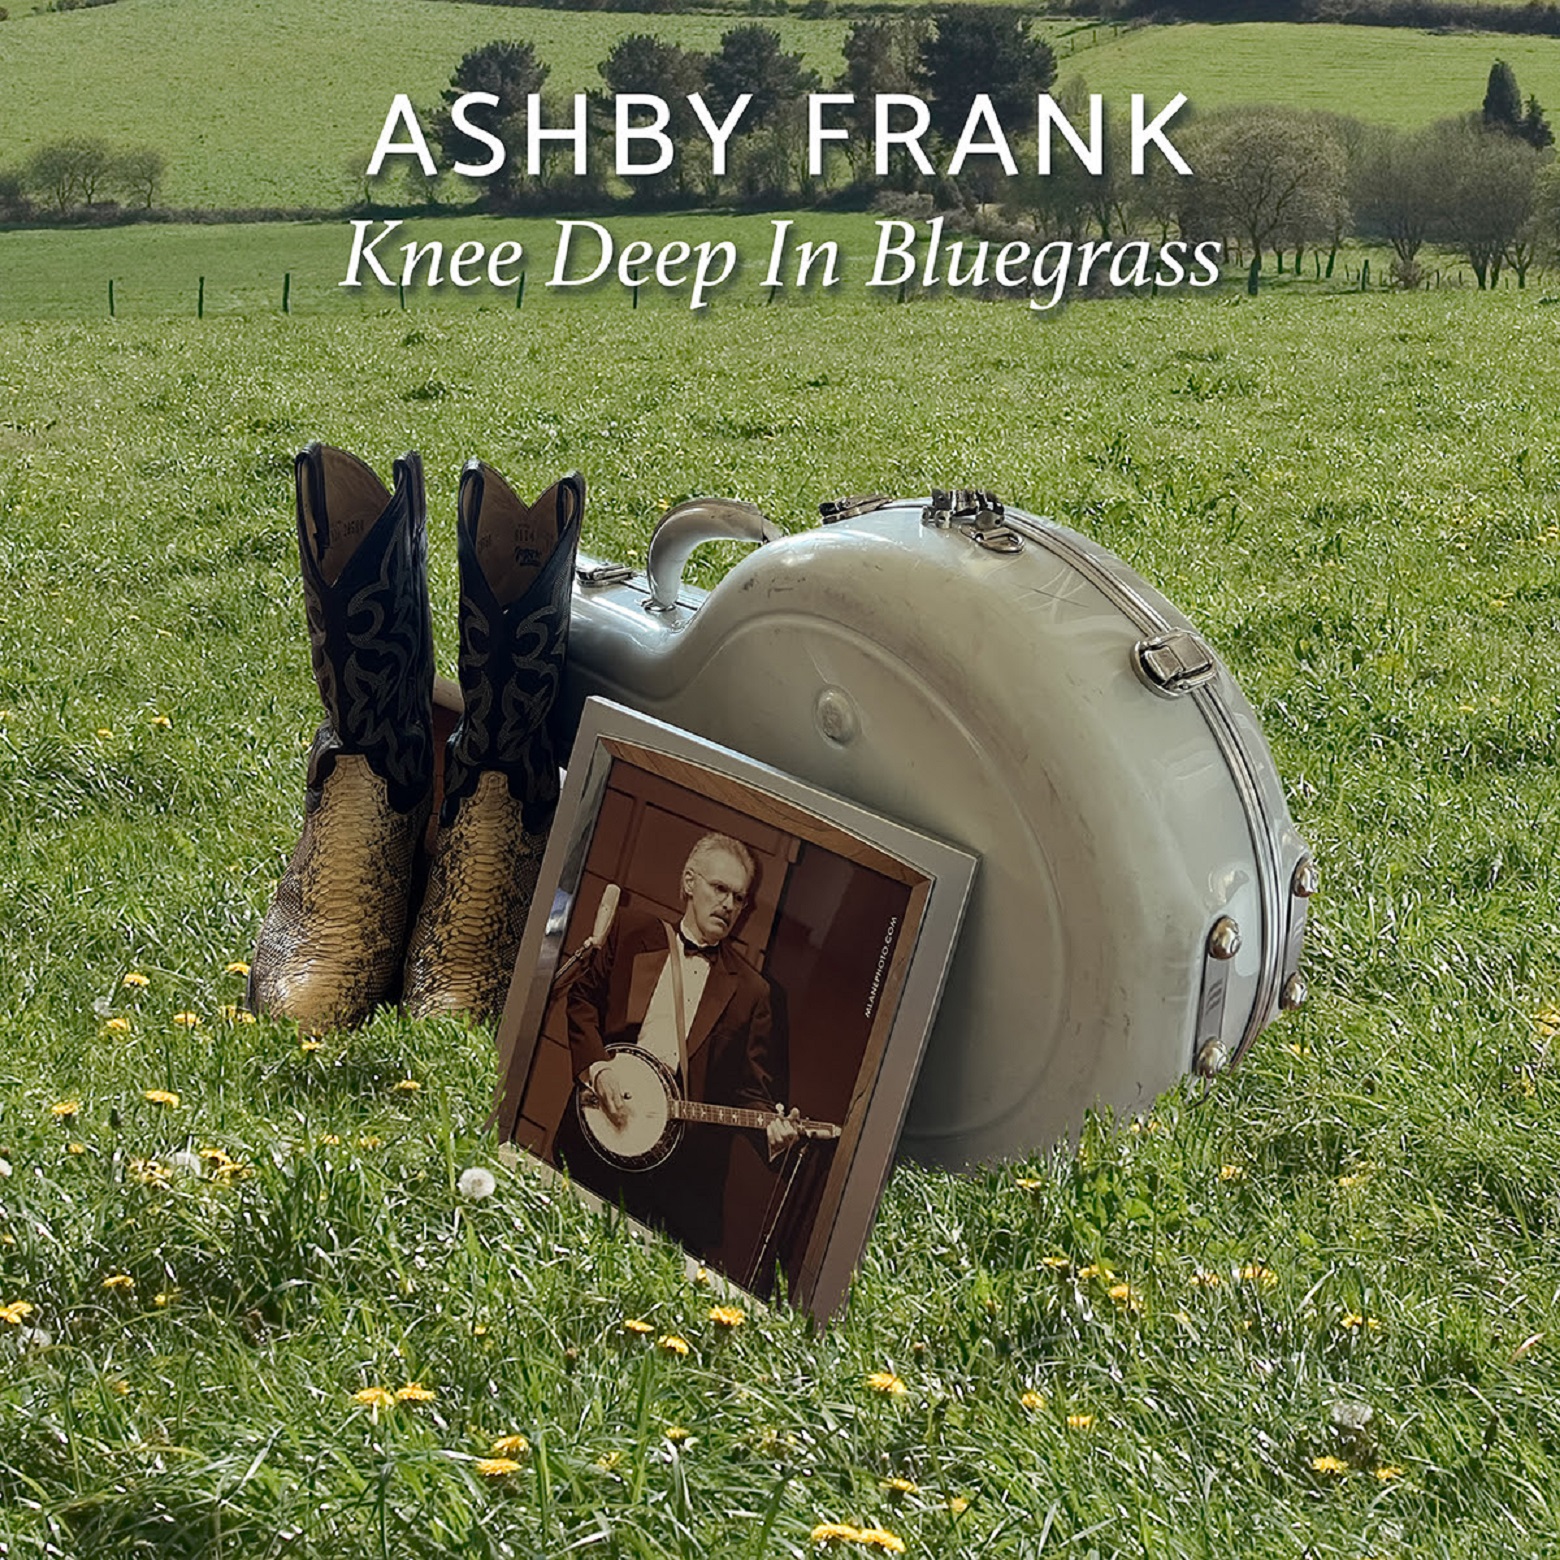 Ashby Frank's "Knee Deep In Bluegrass" pays tribute to a renowned artist, mentor and friend